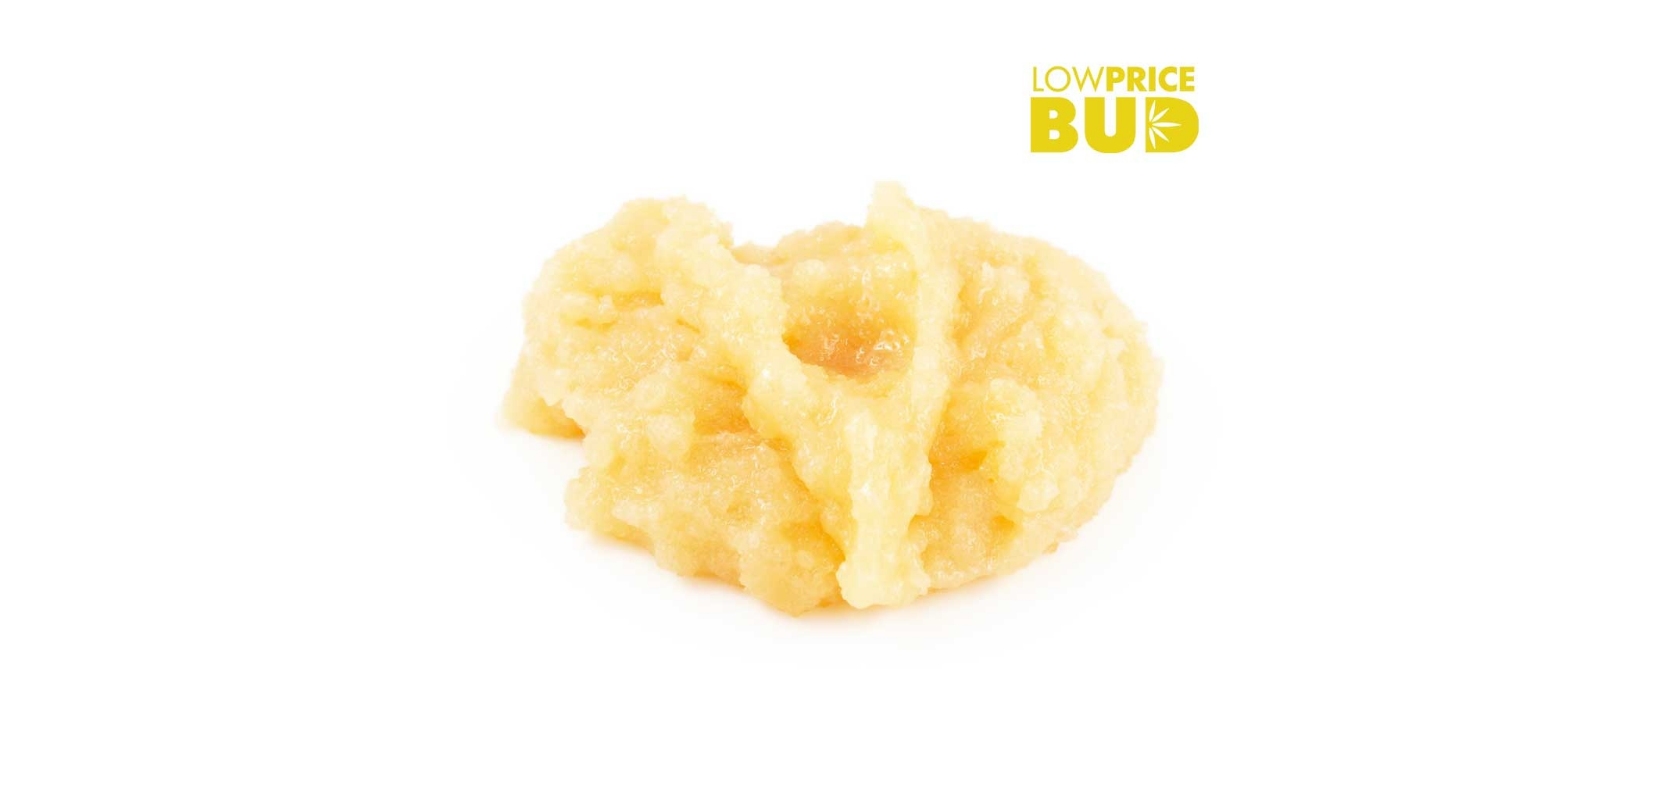 The Live Resin - Strawberry Cough features a legendary Sativa hybrid (80:20 Sativa to Indica ratio) with up to 26 percent of THC. 